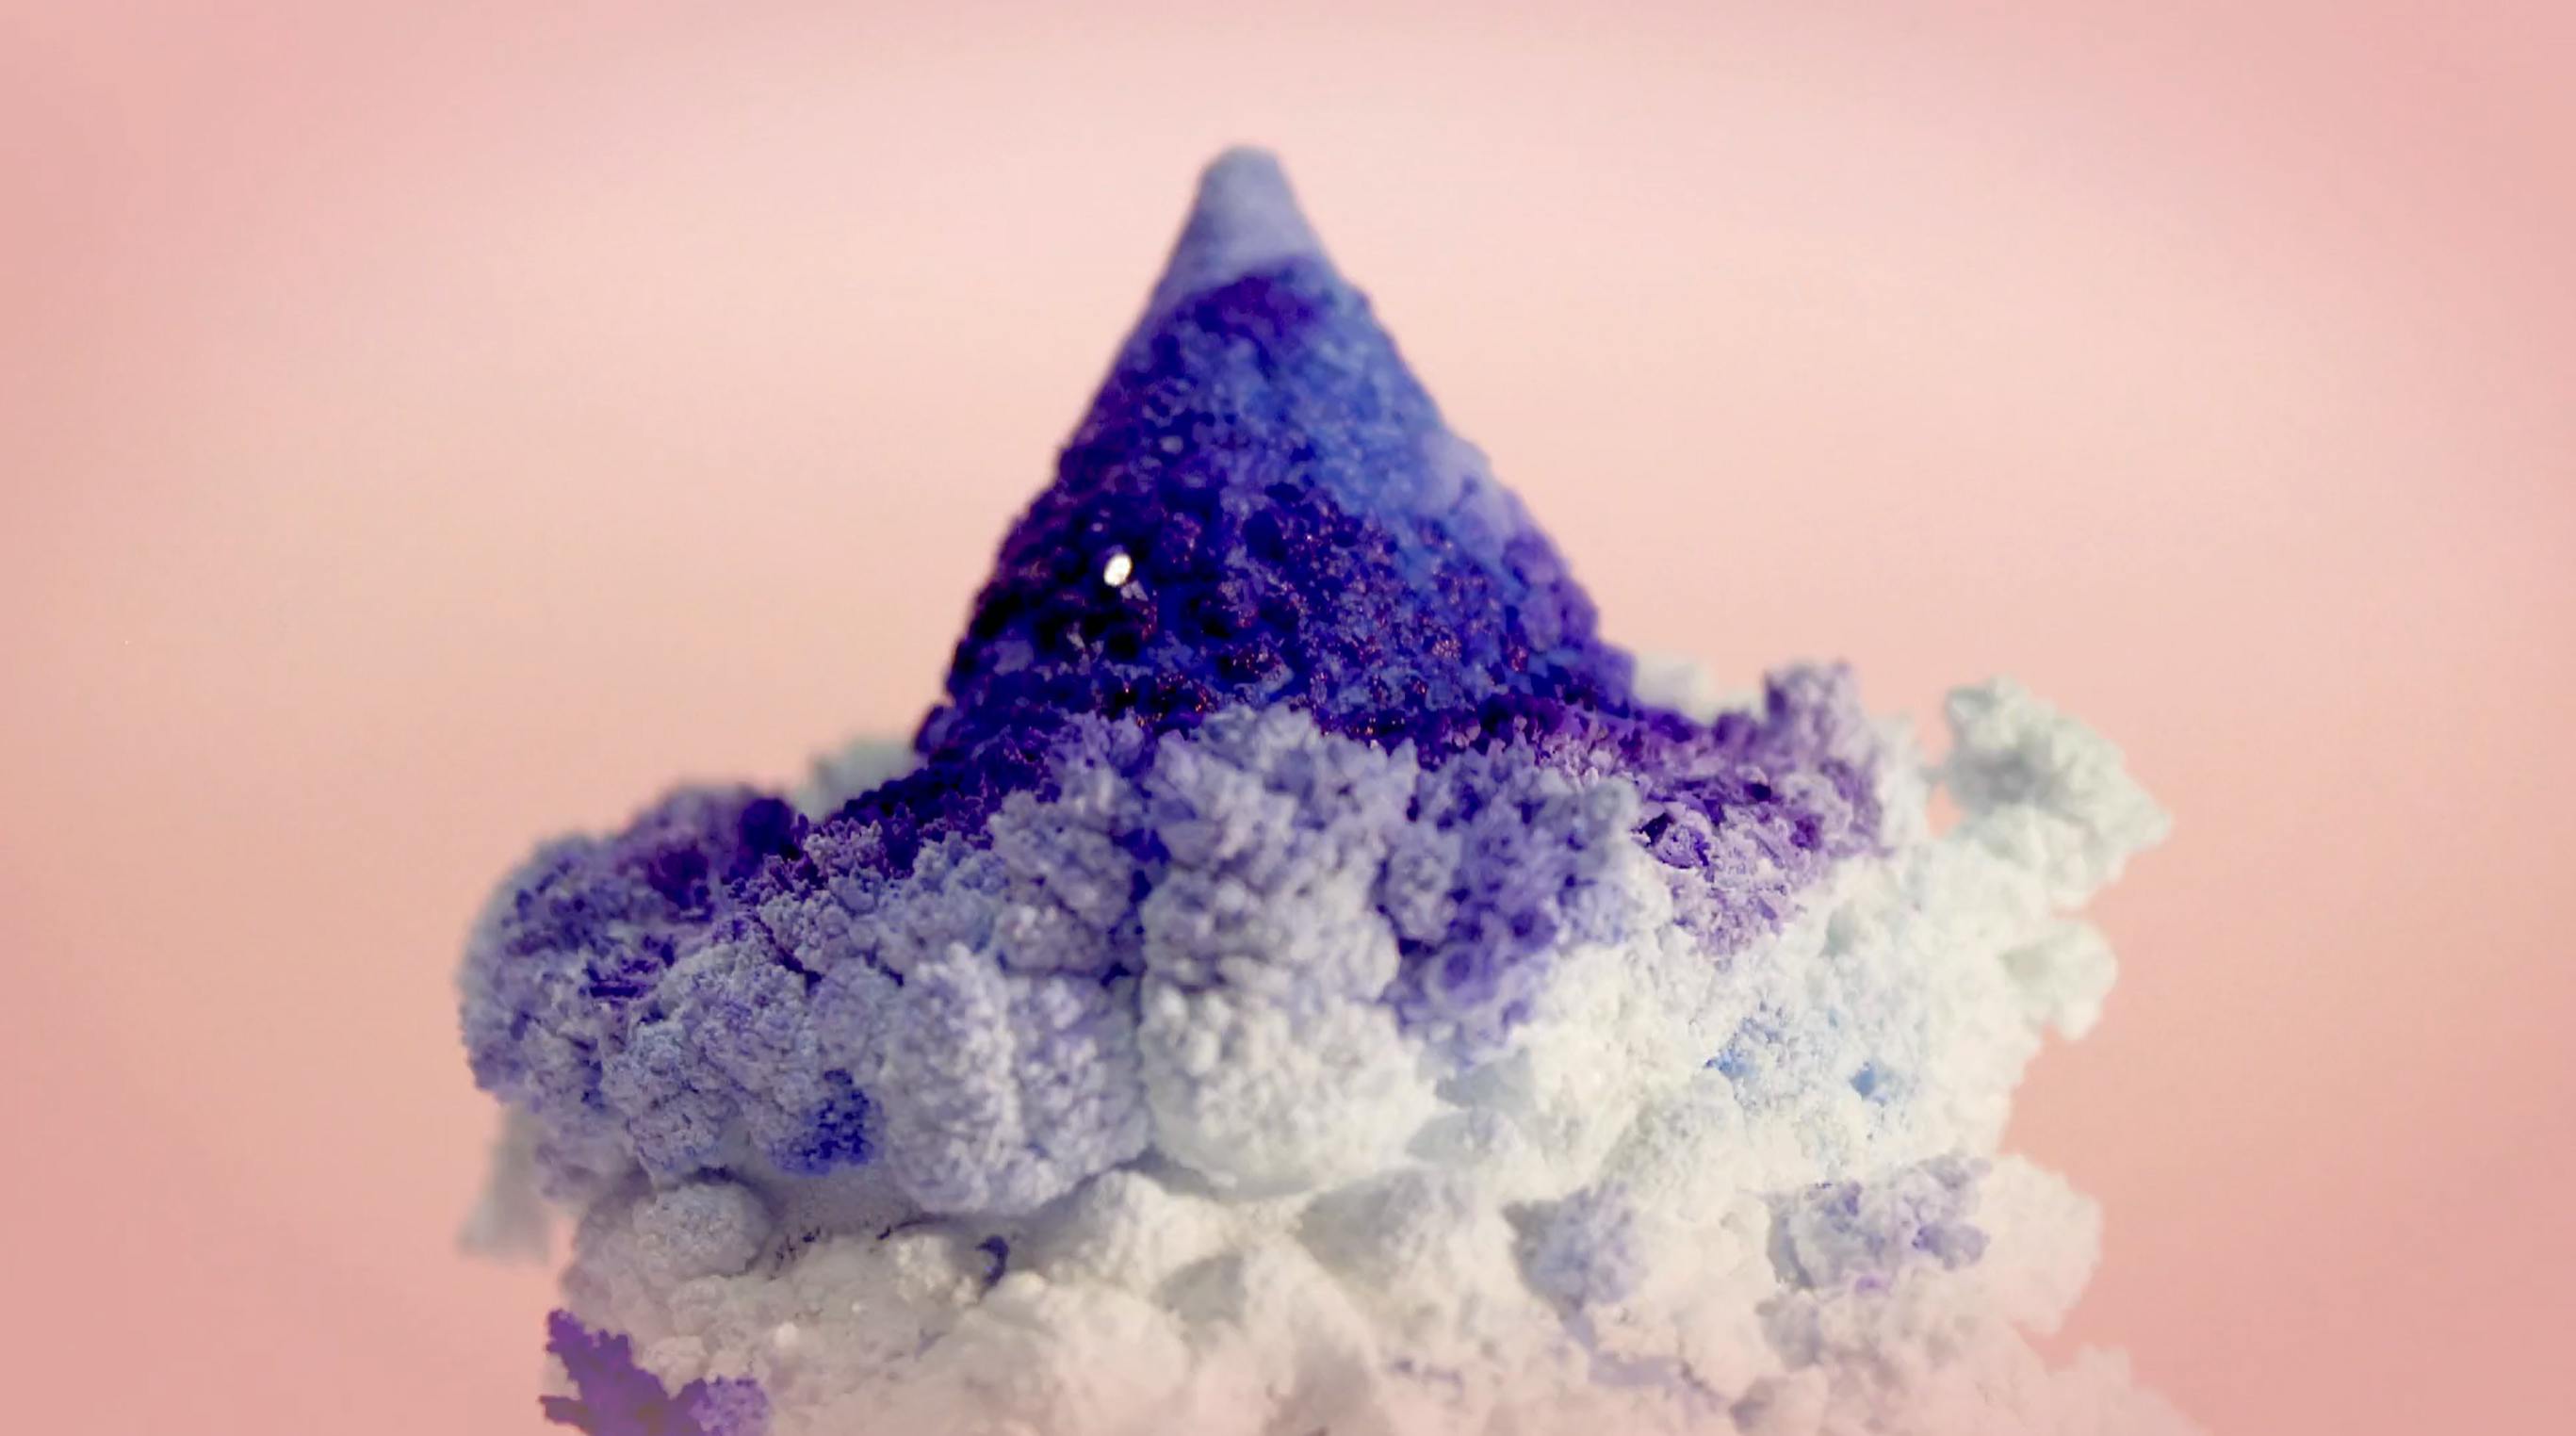 image of a cone with crystals growing on it